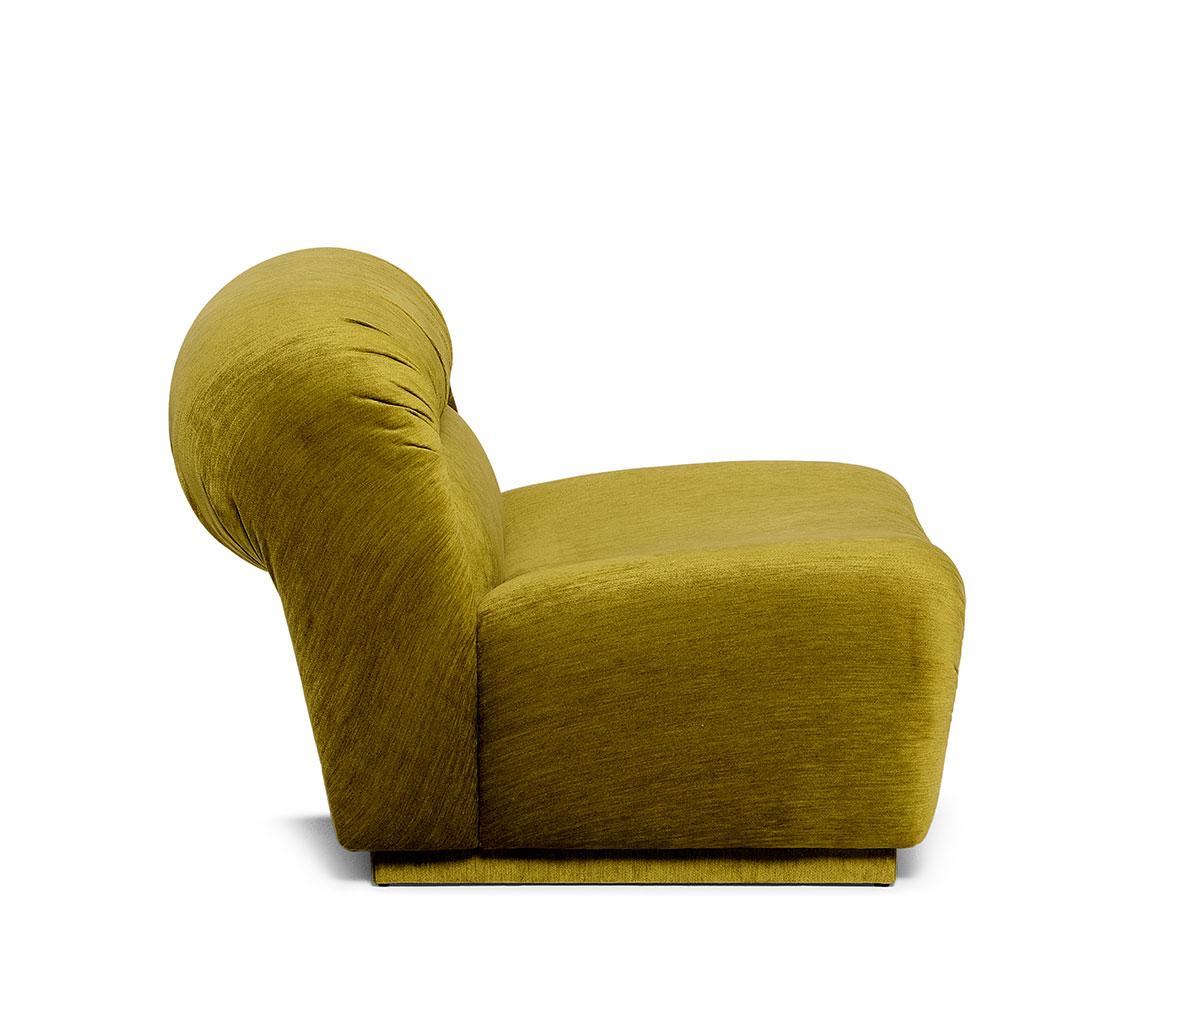 This armchair showcases a distinctive interplay of texture and color through its signature curvaceous form. The pleated details accentuate the smooth, rounded shapes of the low seat and back, adding to its expressive character. Perfect for relaxed